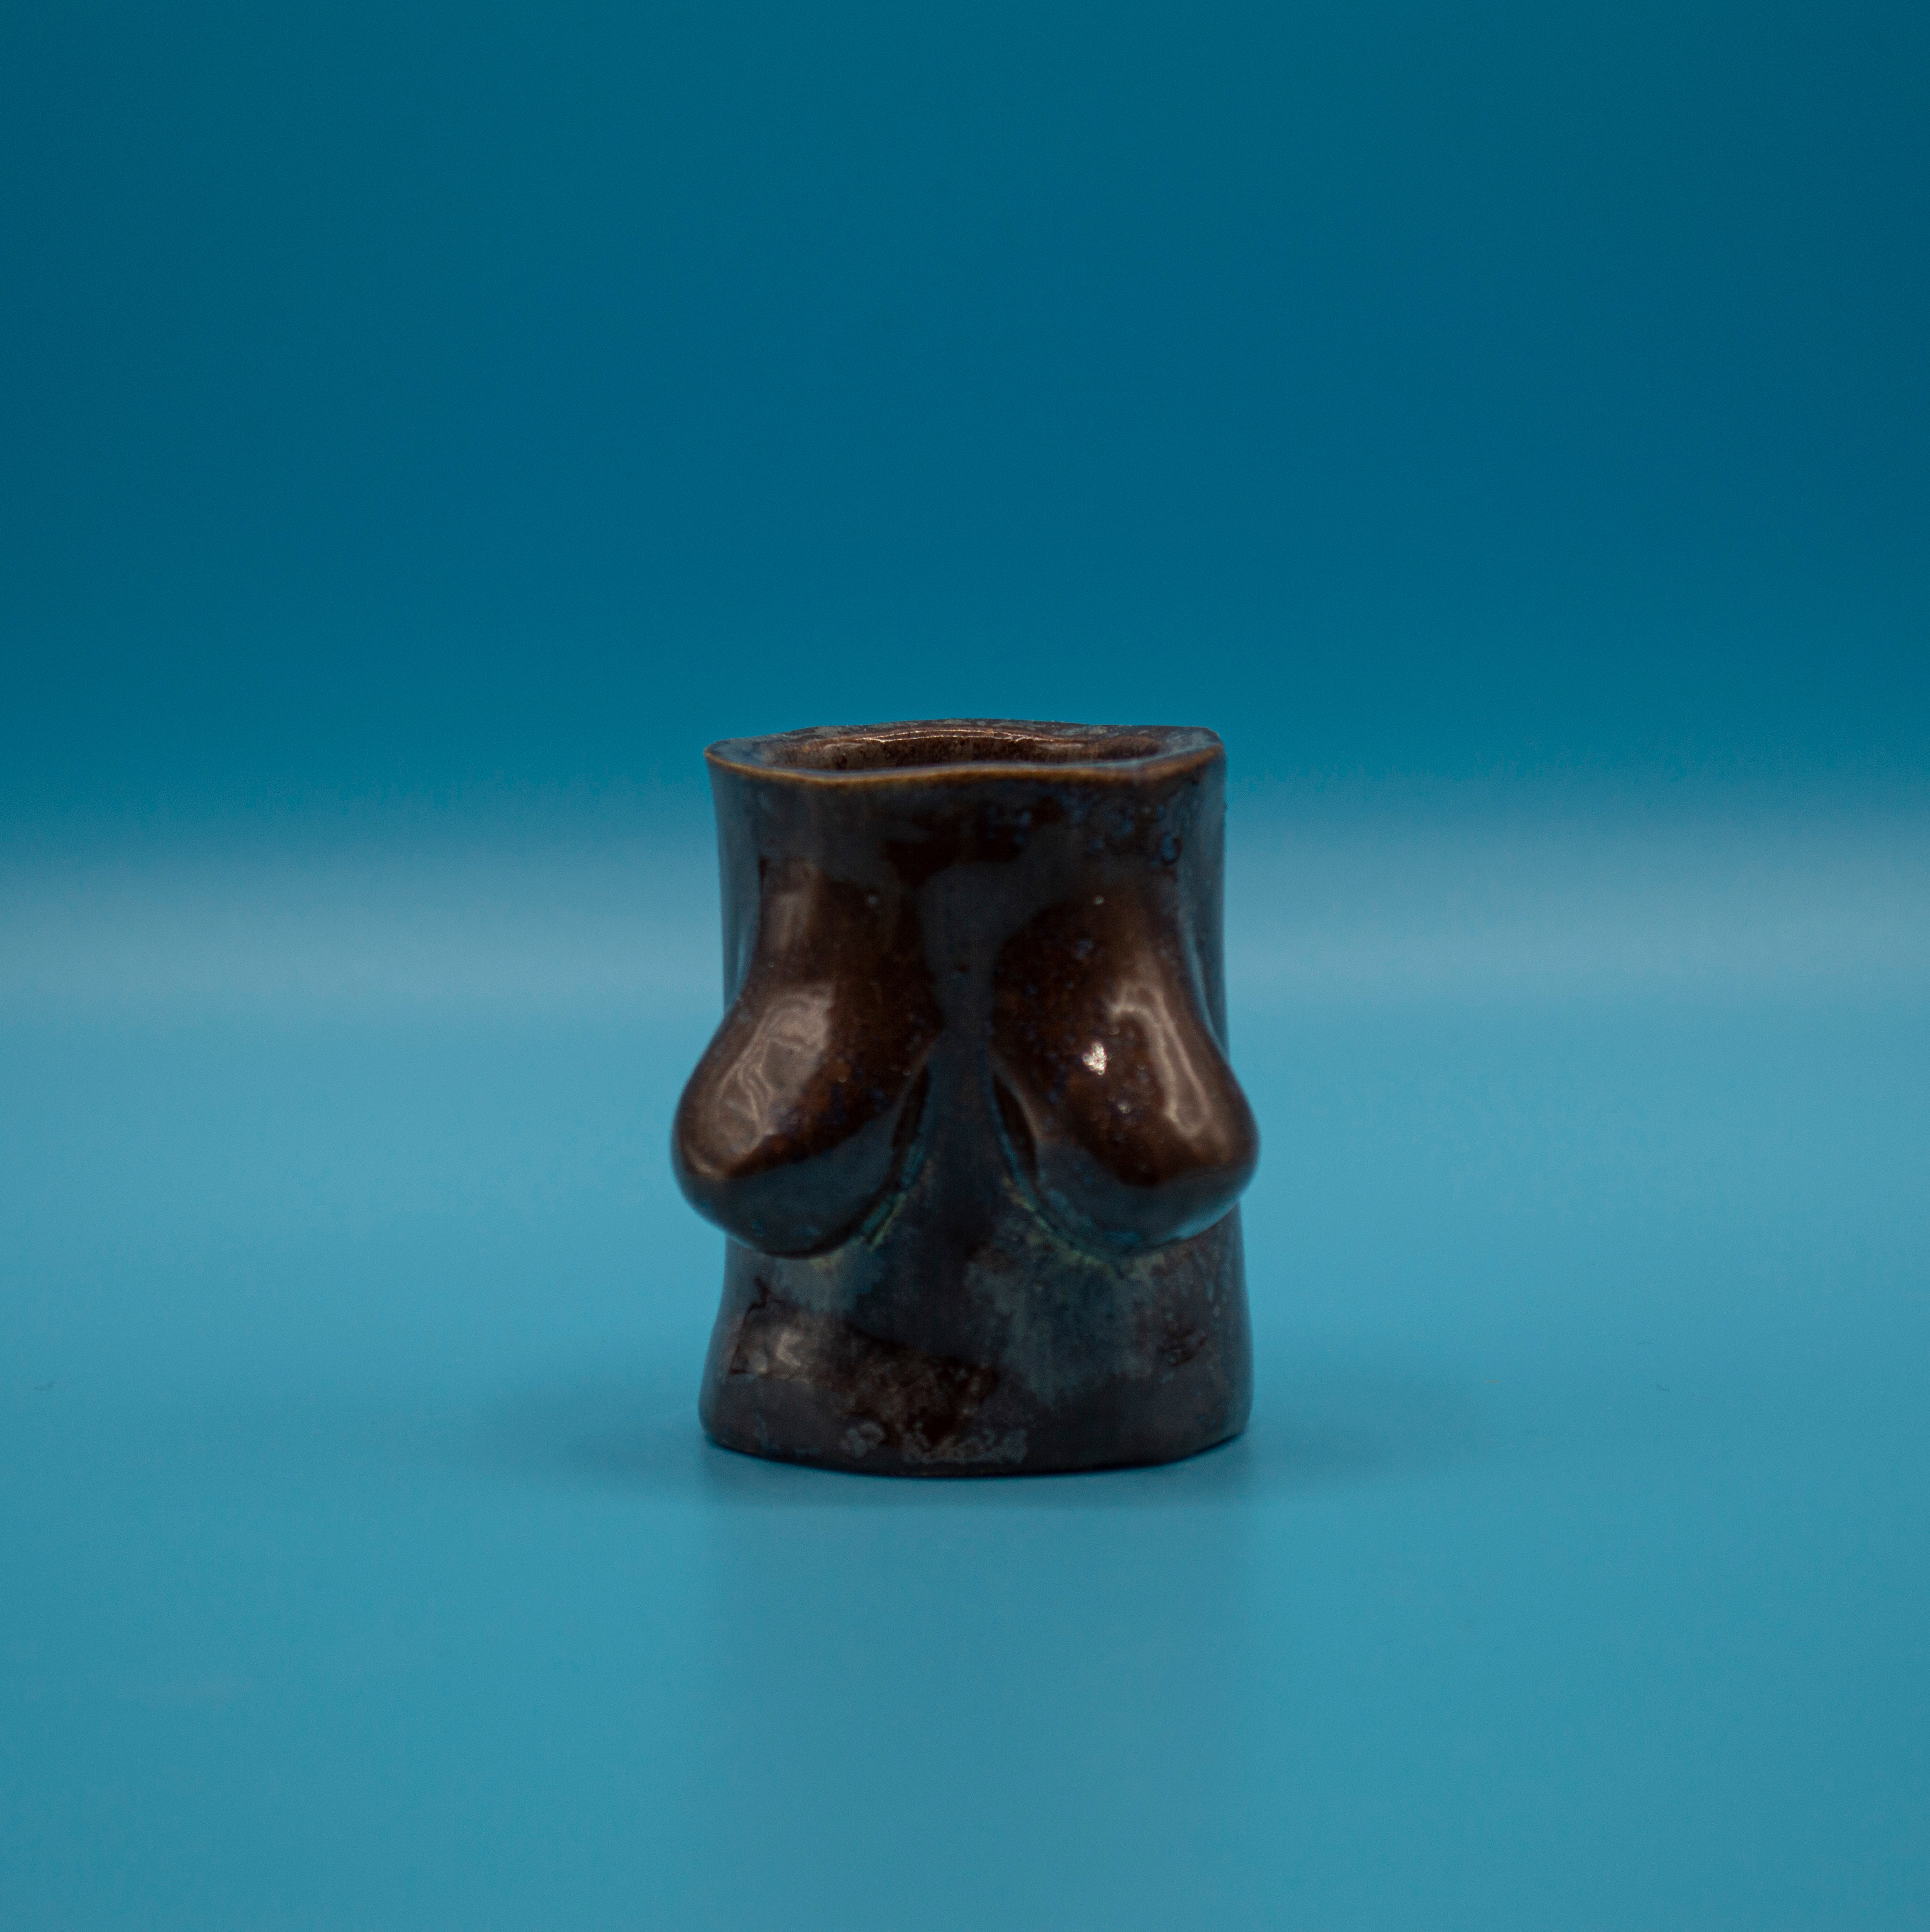 Brown ceramic shot glass with slightly saggy breasts.